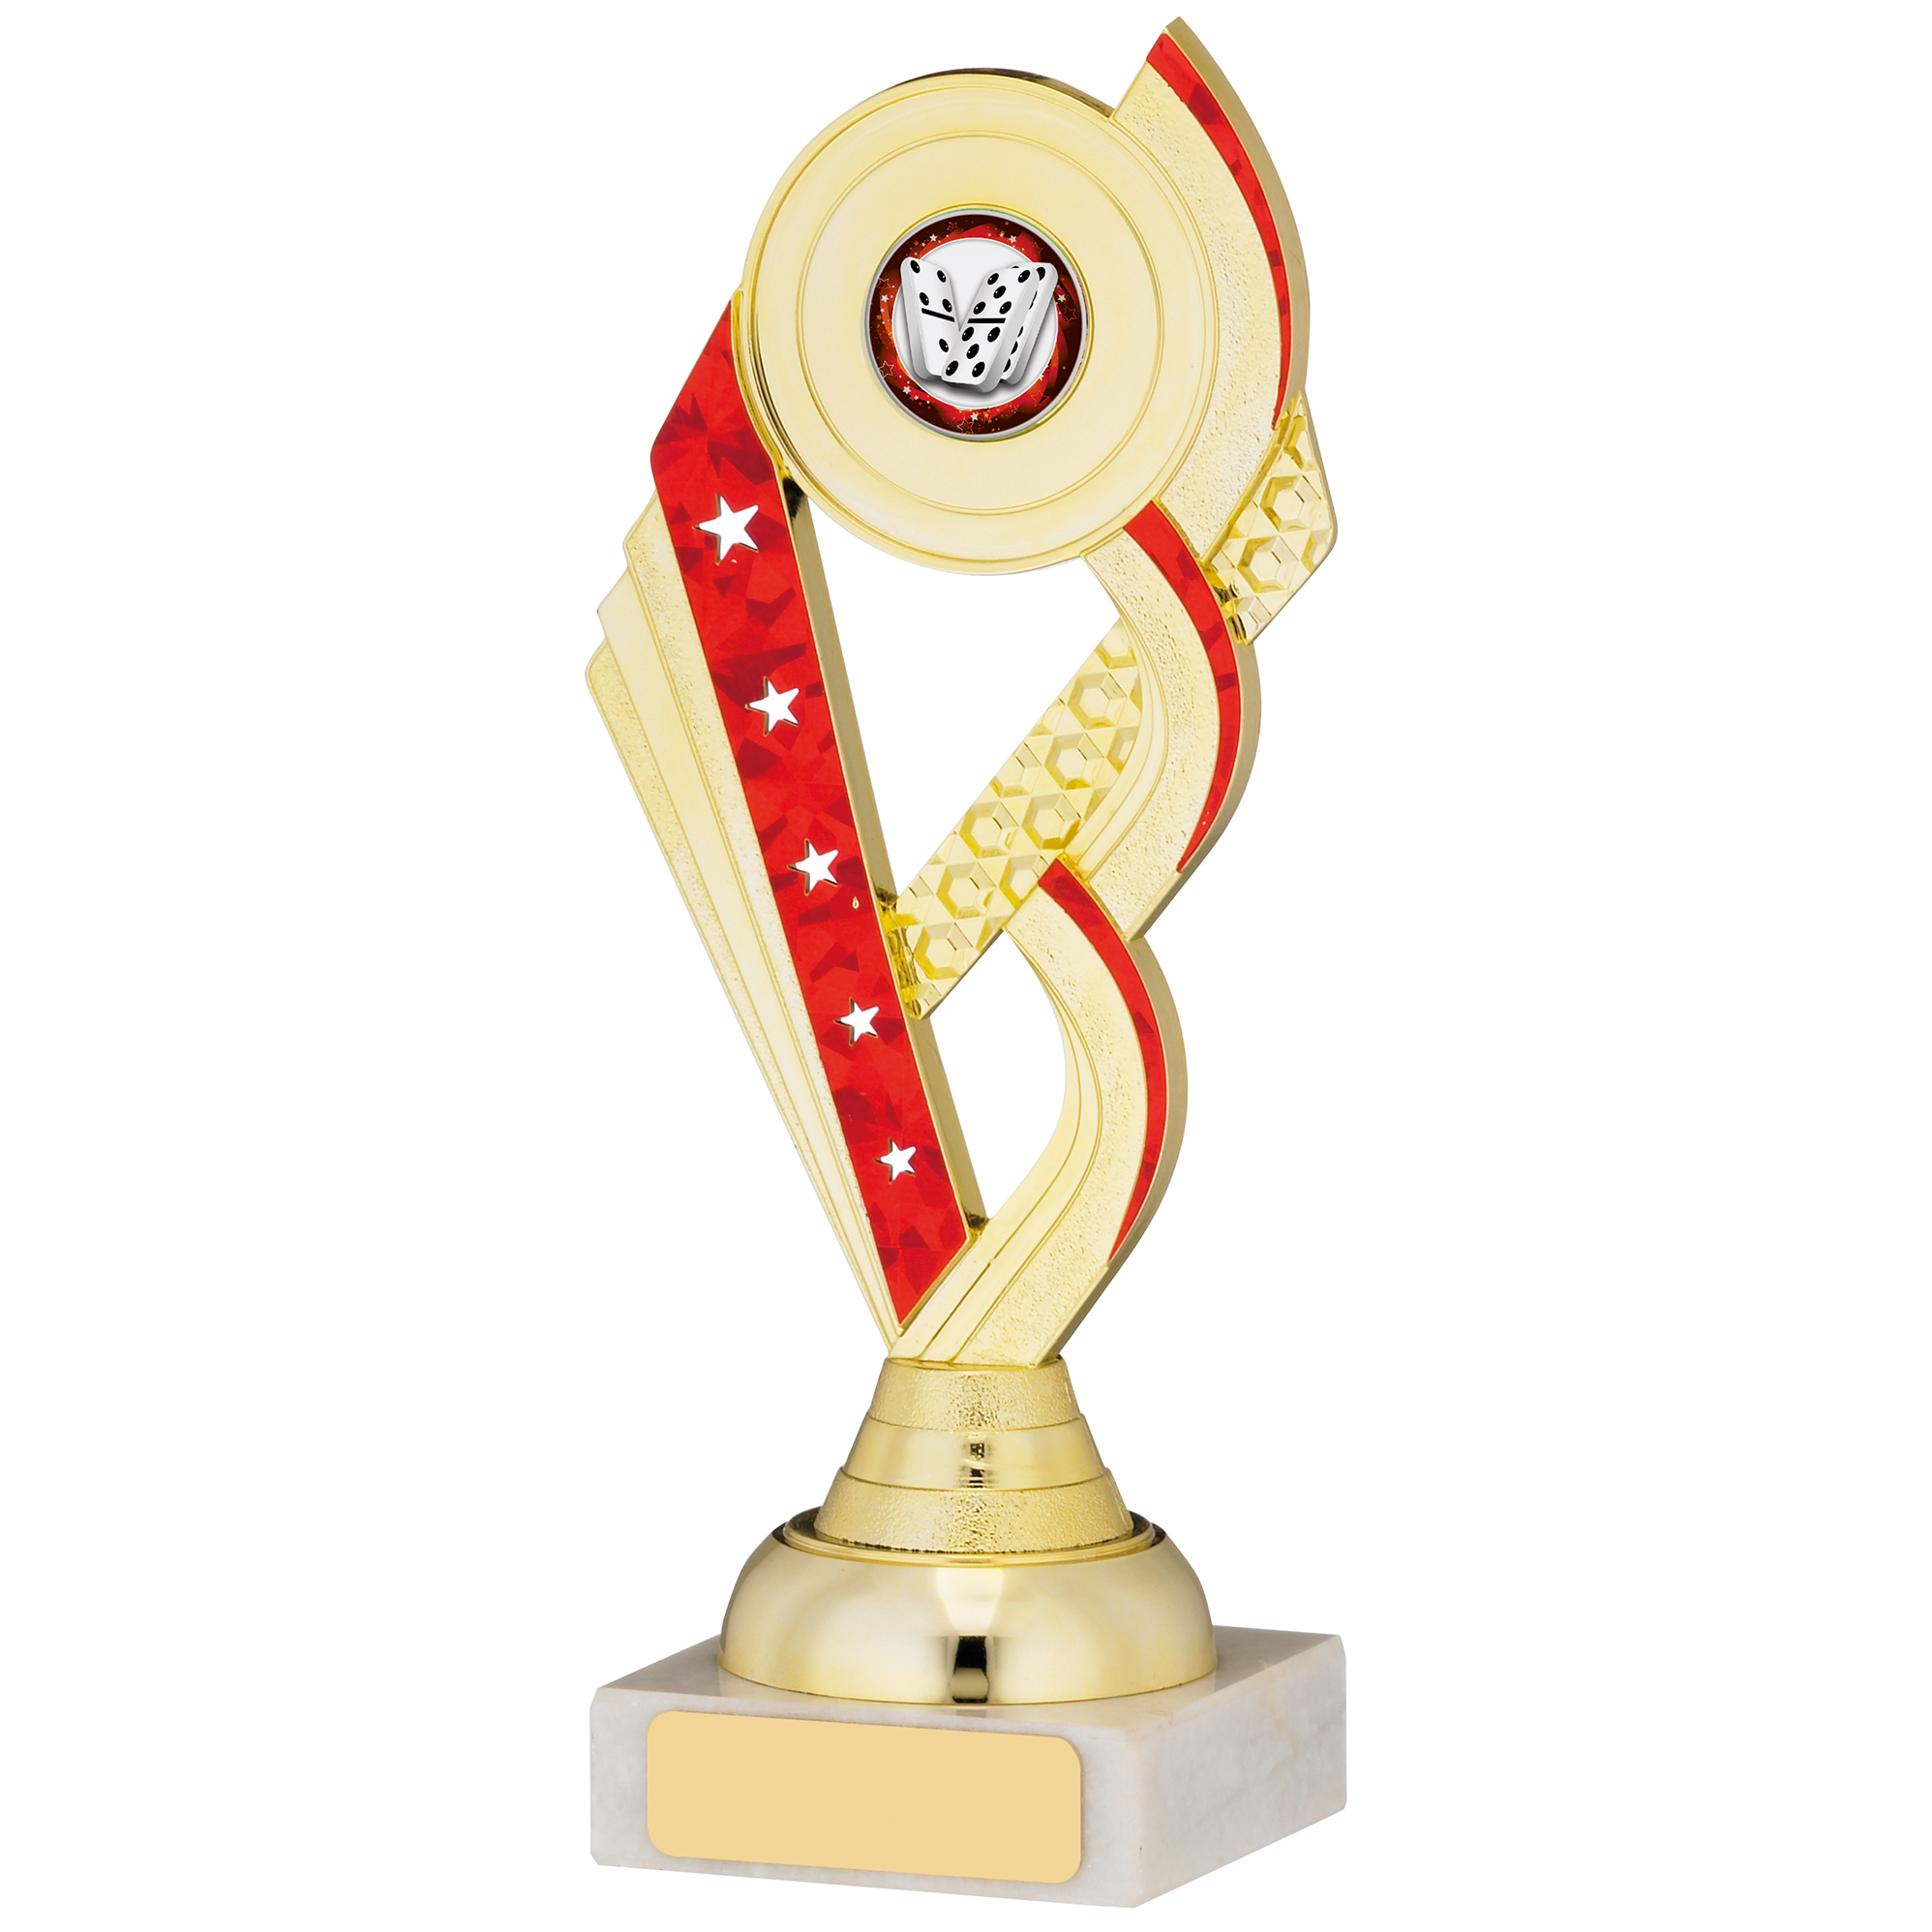 21cm GOLD AND RED TROPHY